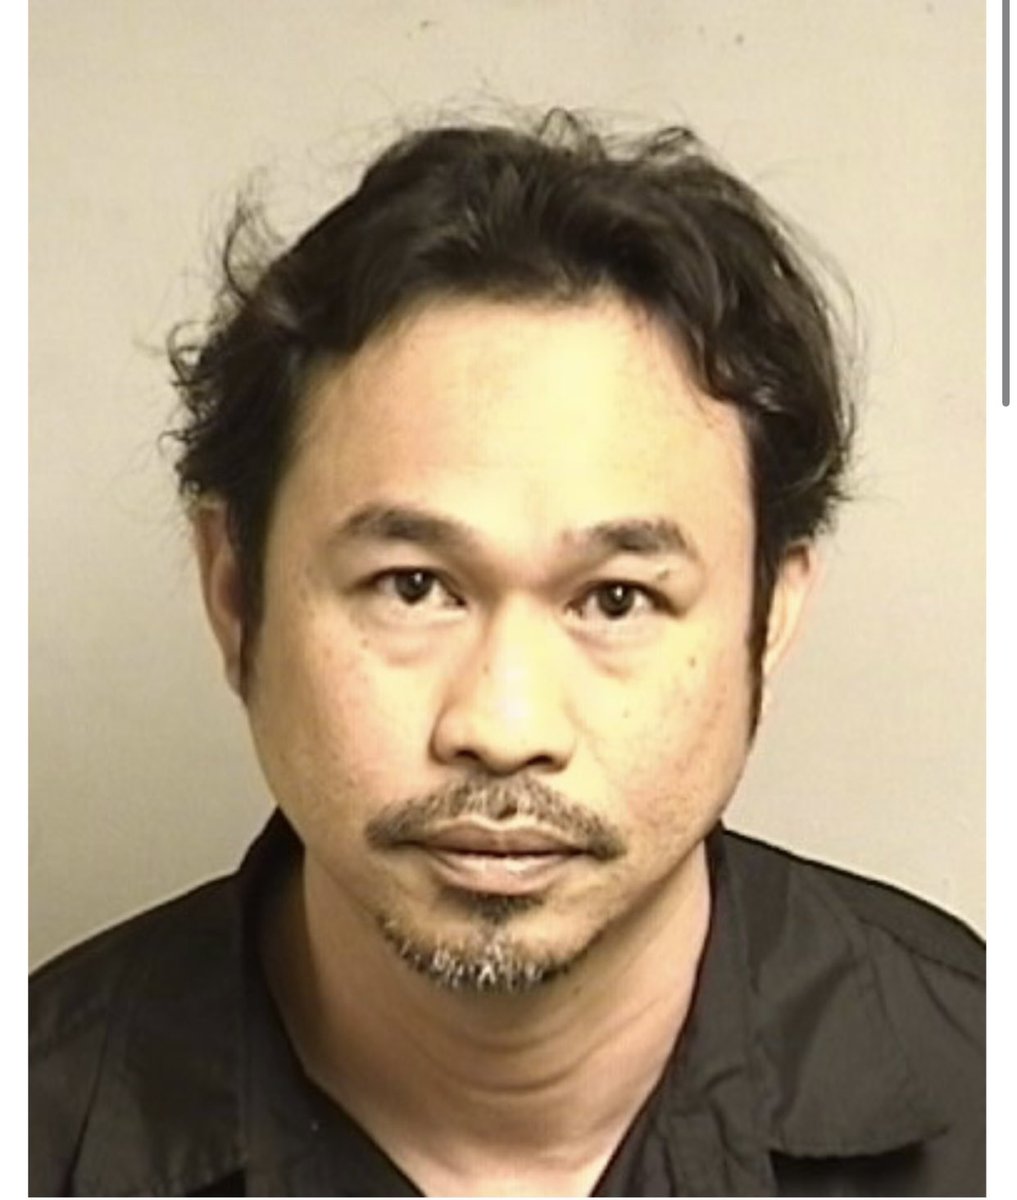 JUST IN: Concord police arrested a hairstylist this morning at his salon on charges of rape and lewd acts with a child. Investigators say a mother dropped her teenage daughter off for a 3 hour hair treatment and the suspect raped the girl. They say there may be more victims.